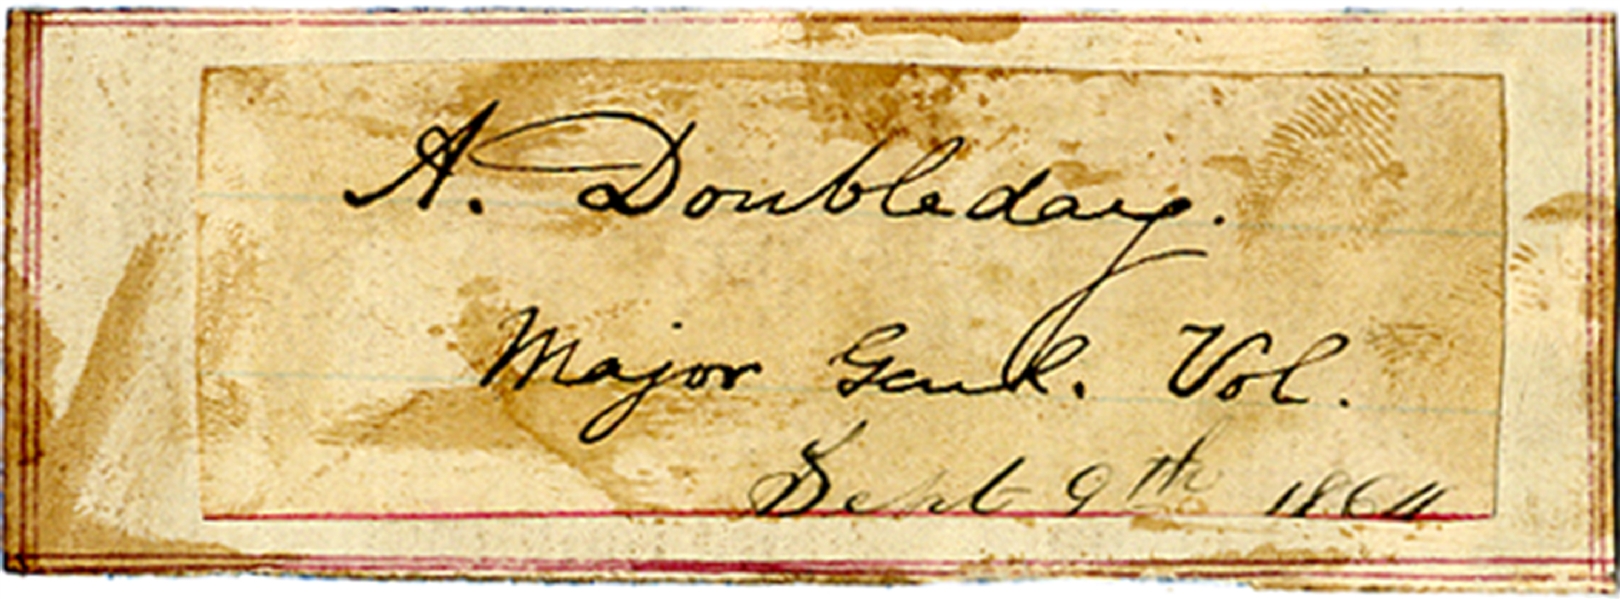 The Following Nine Lots Are All Clipped Signatures of Union Generals